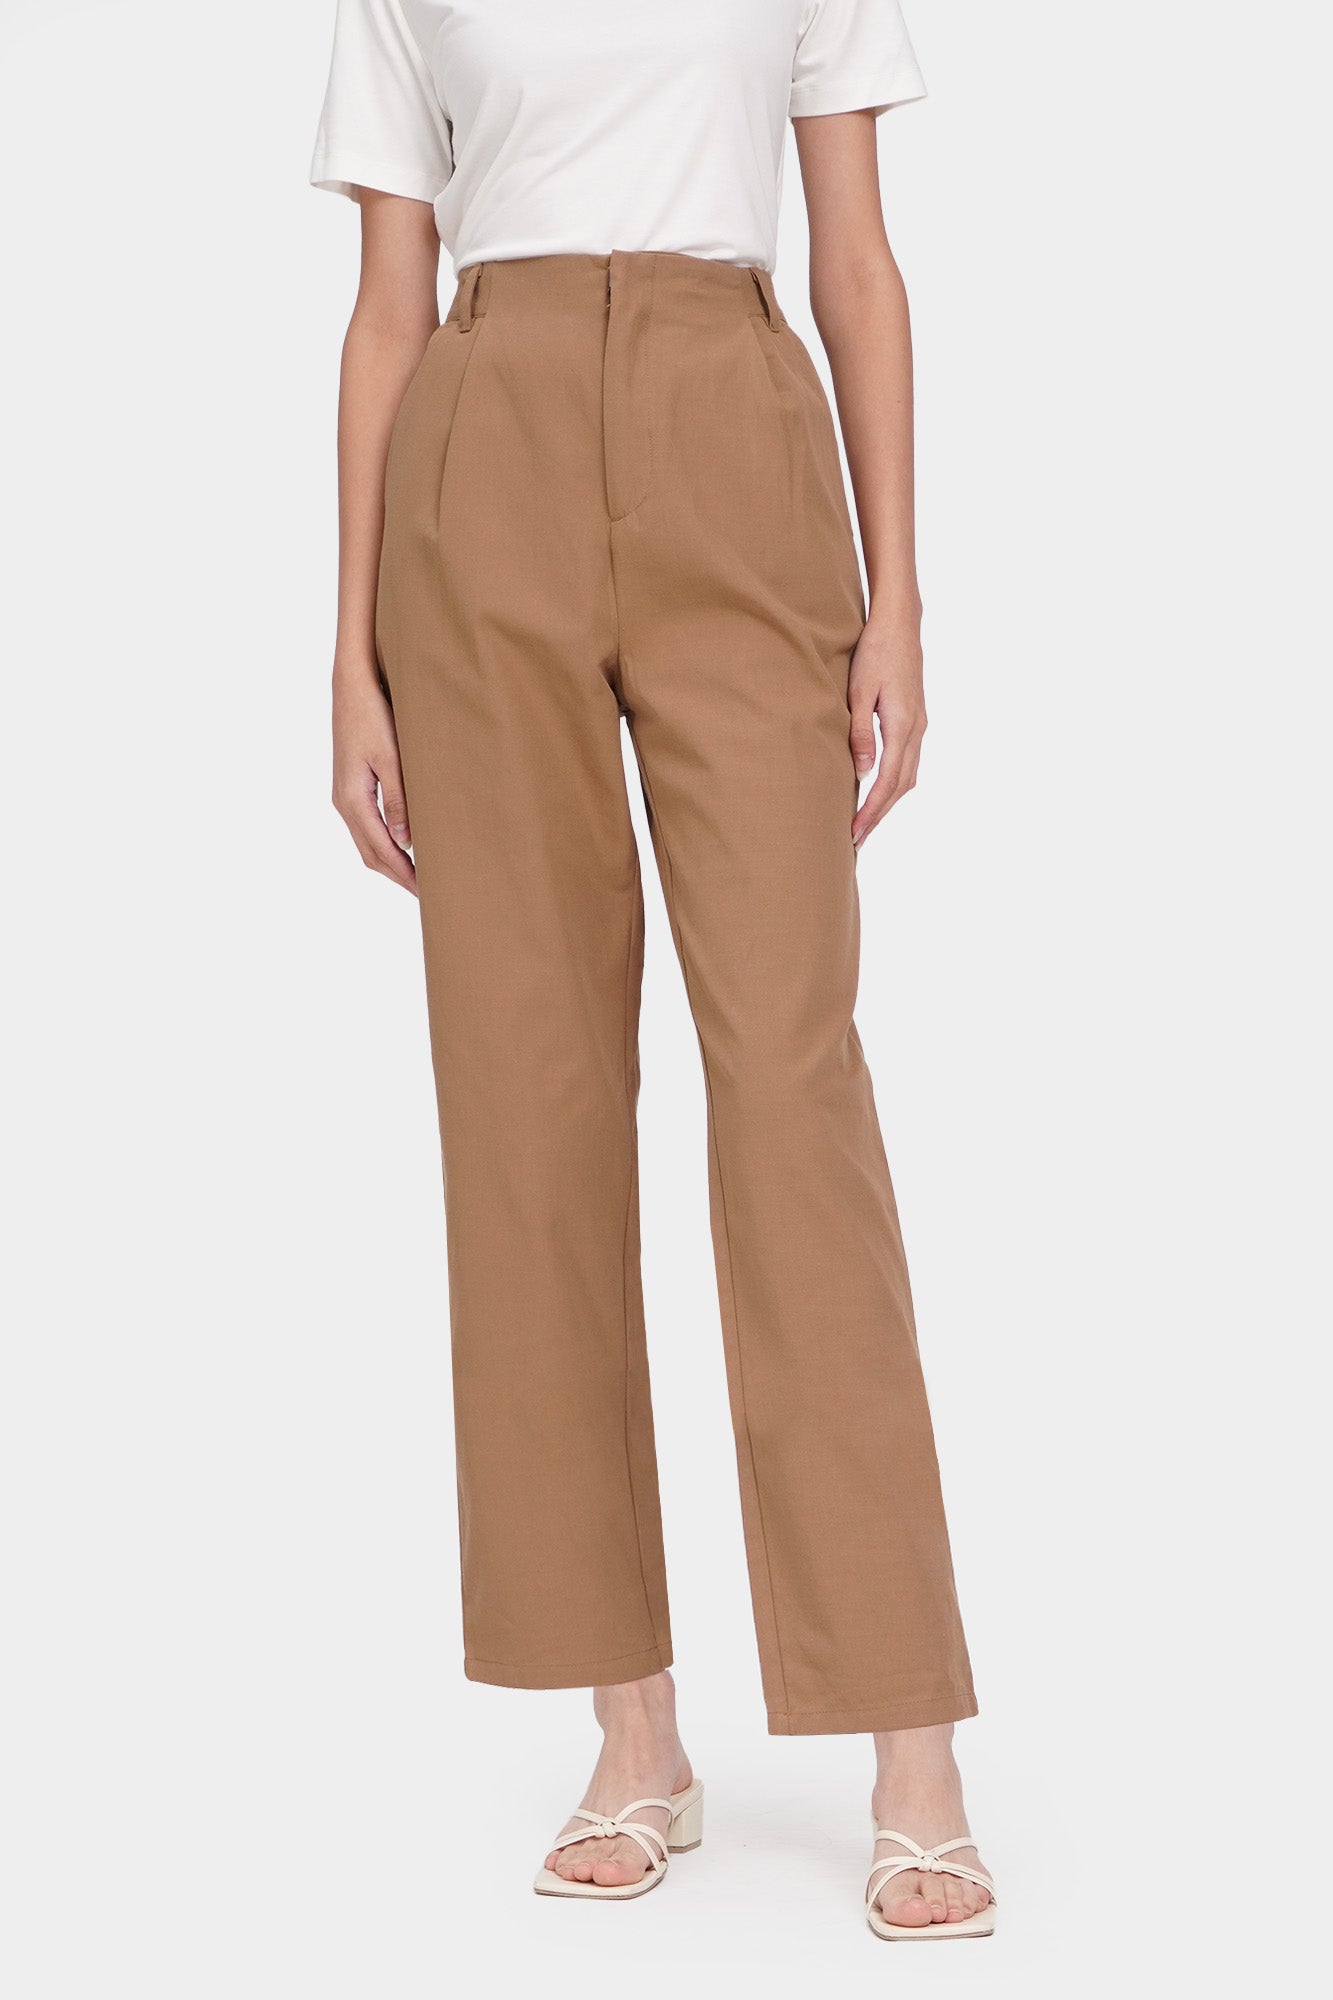 Closet Staples Pleated Ankle Length Trousers